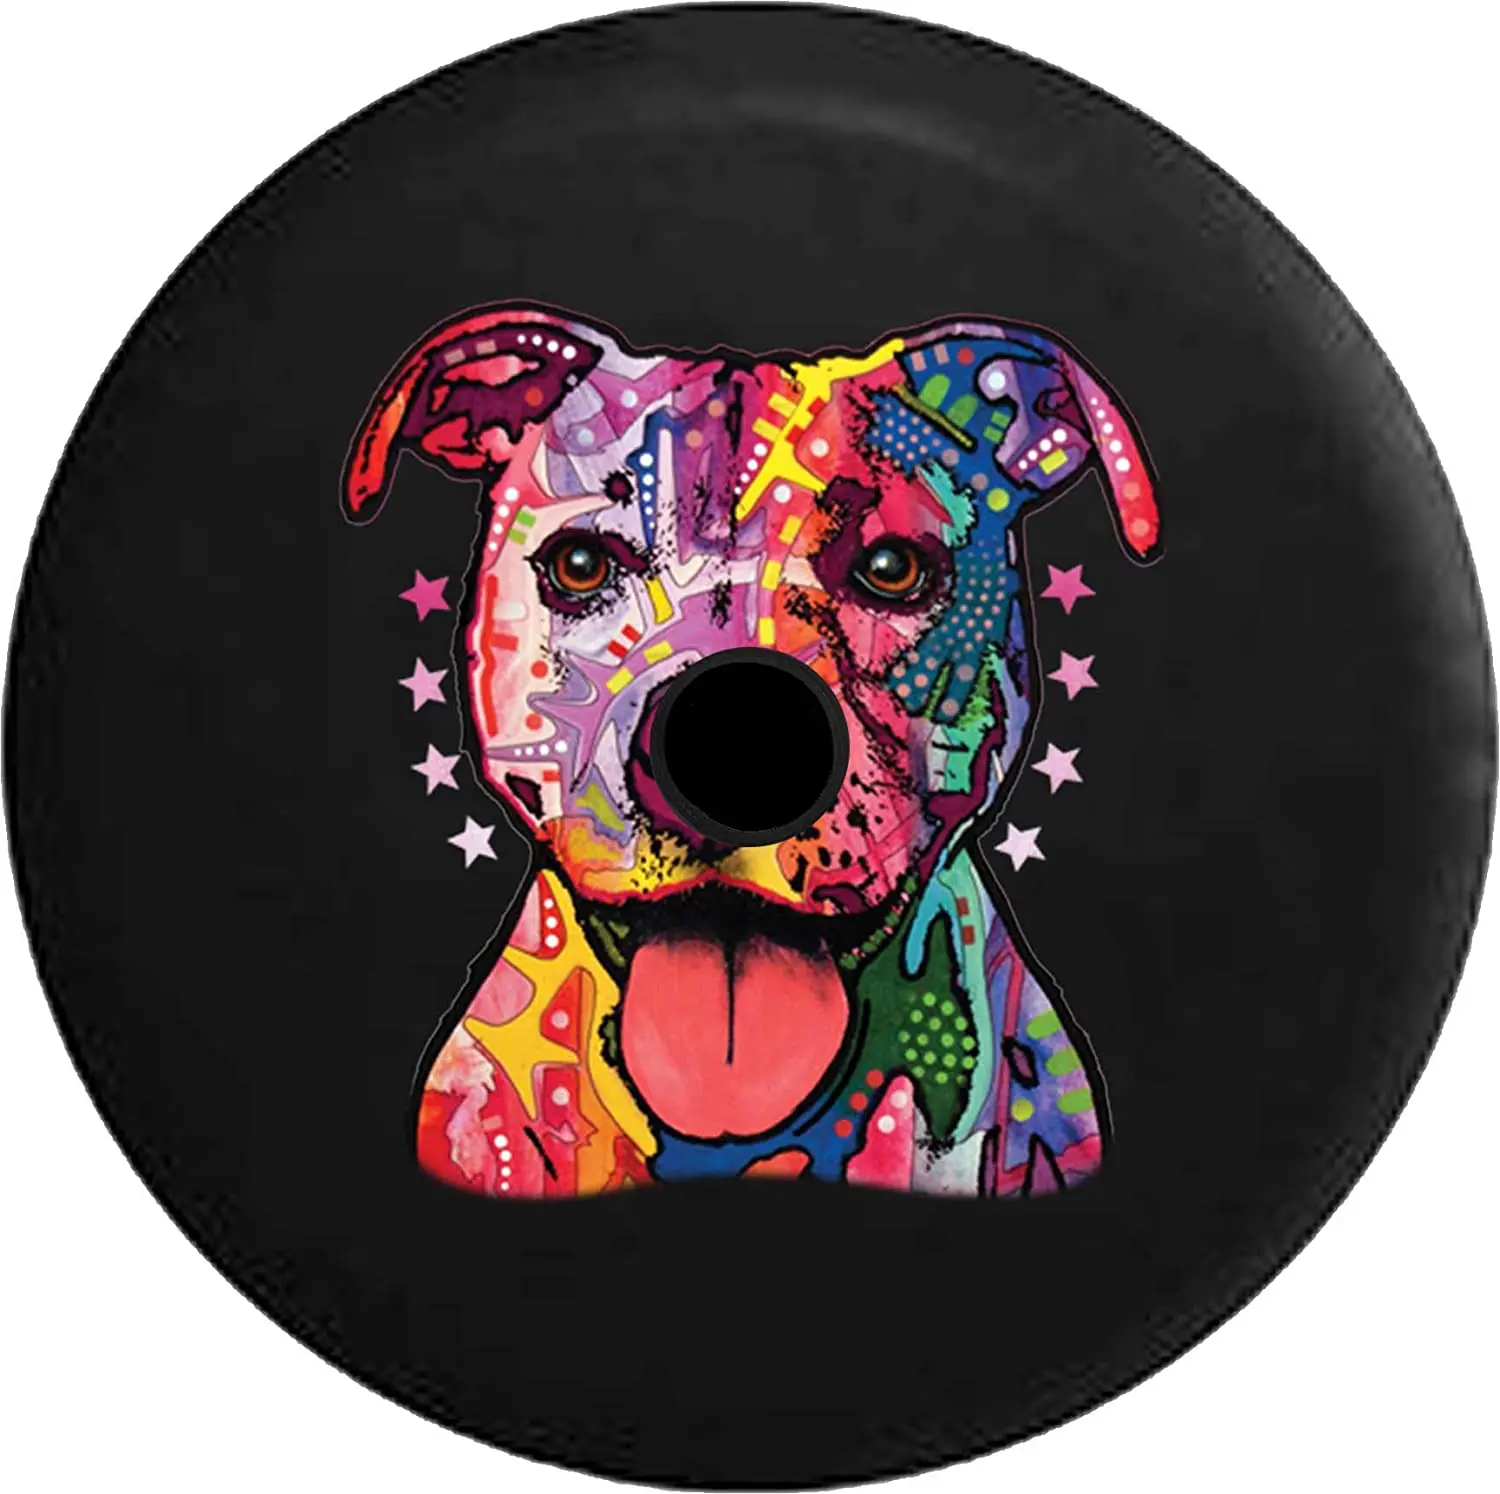 

Pike Outdoors JL Series Spare Tire Cover with Backup Camera Hole Neon Artistic K9 American Lab Pit Bull Staffy Dog Mix Black